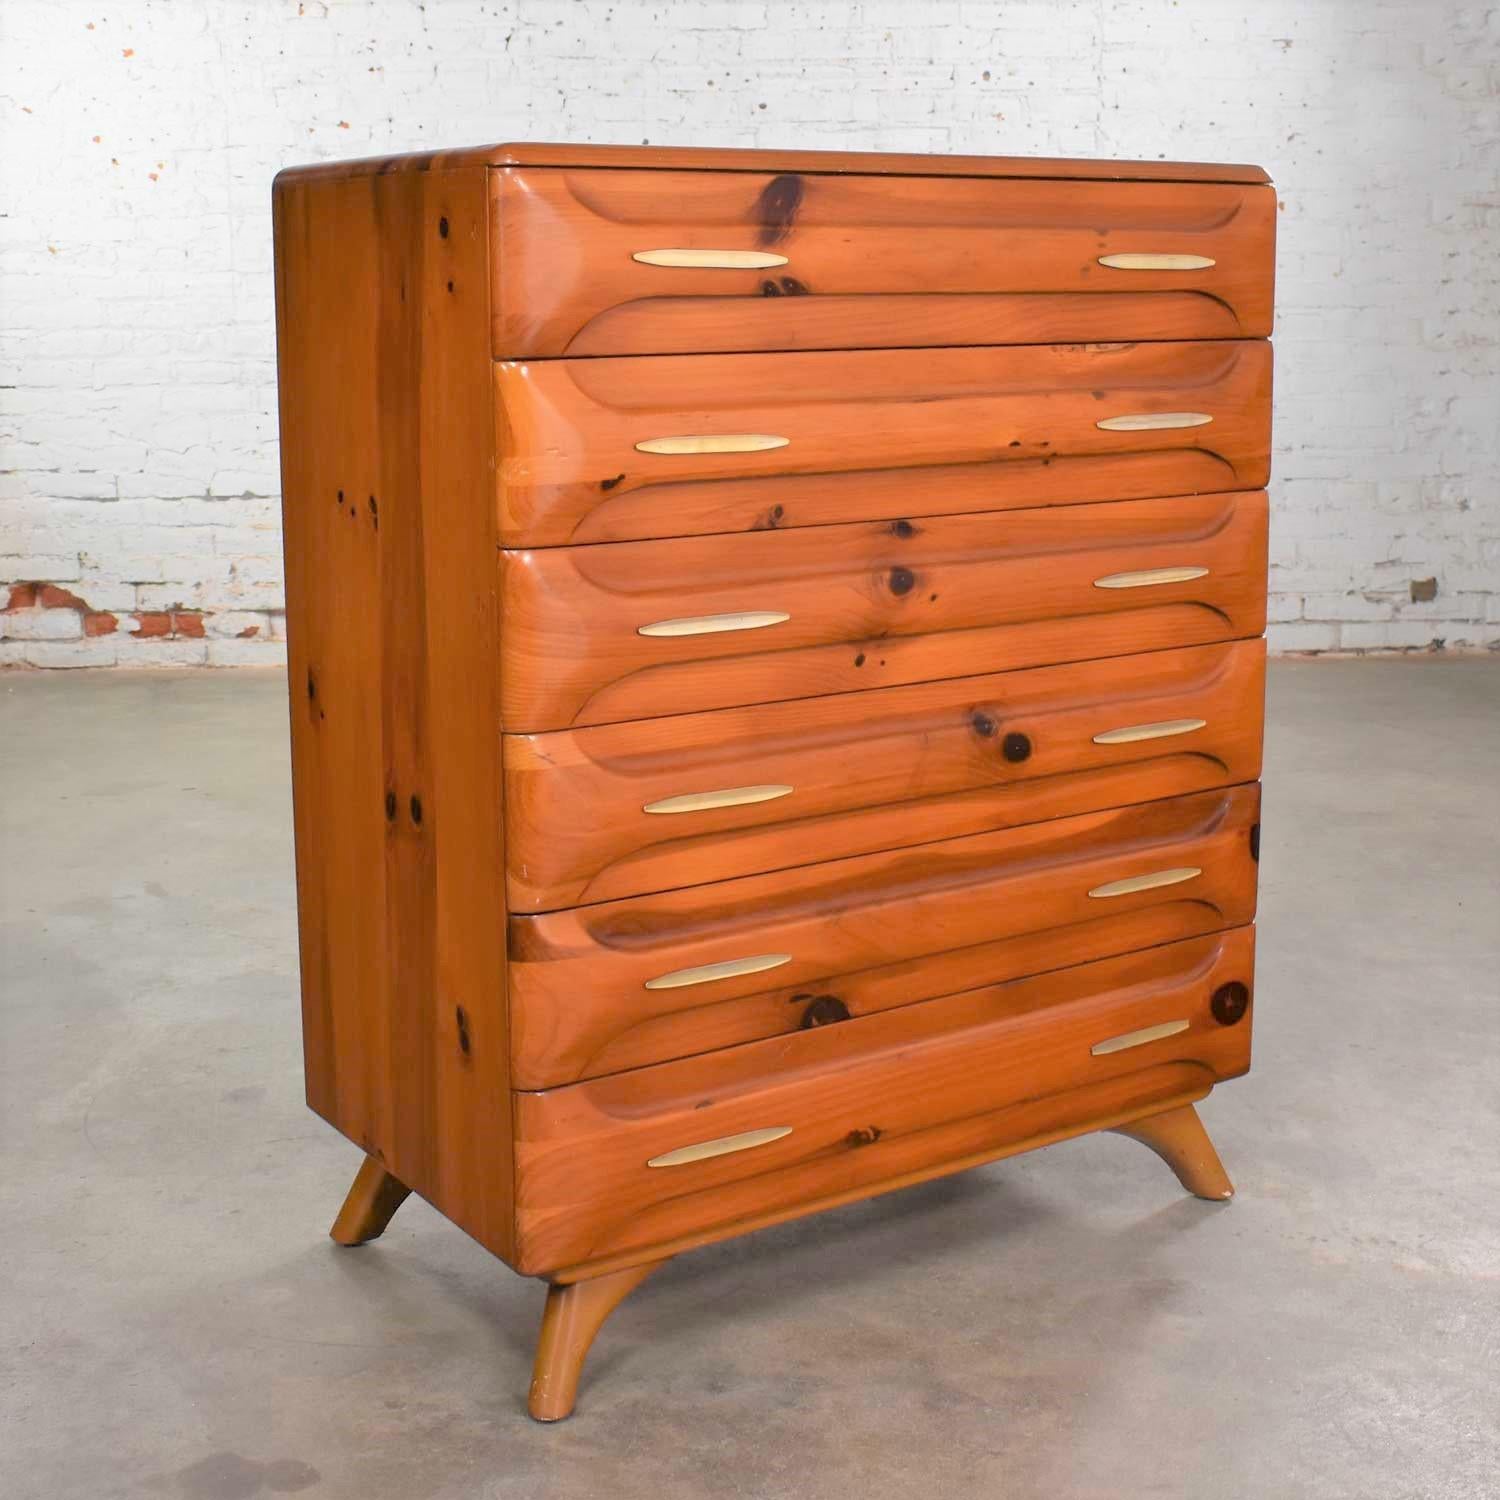 Handsome Mid-Century Modern tall chest of drawers by Franklin Shockey Furniture from their Sculpted Pine Collection. In wonderful vintage condition with a beautiful age patina. We have not refinished this piece but restored with some touch up to the